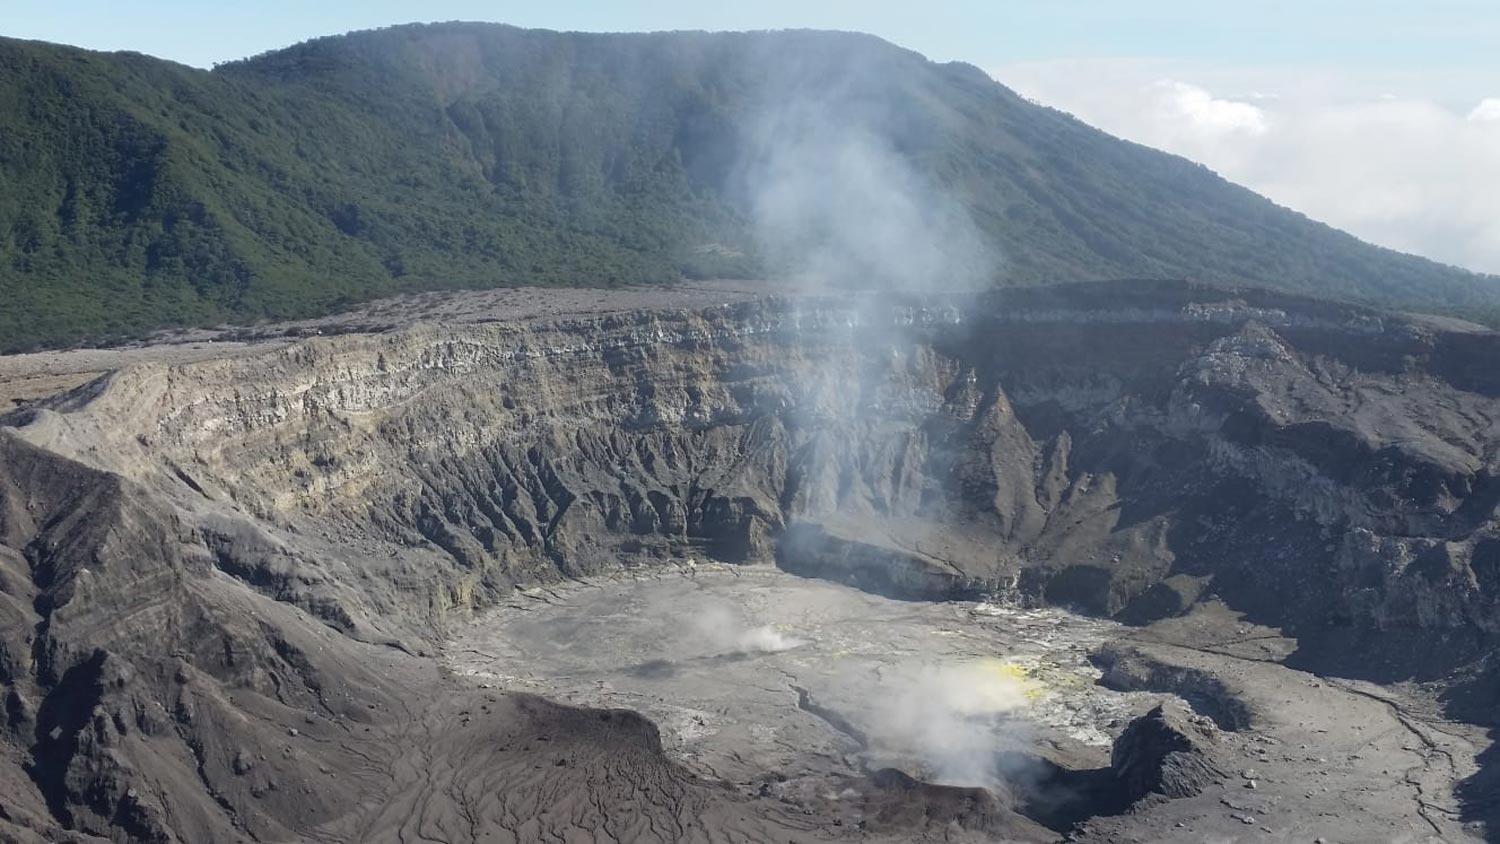 The crater of Volcan Poas in Costa Rica is one of the biggest in the world